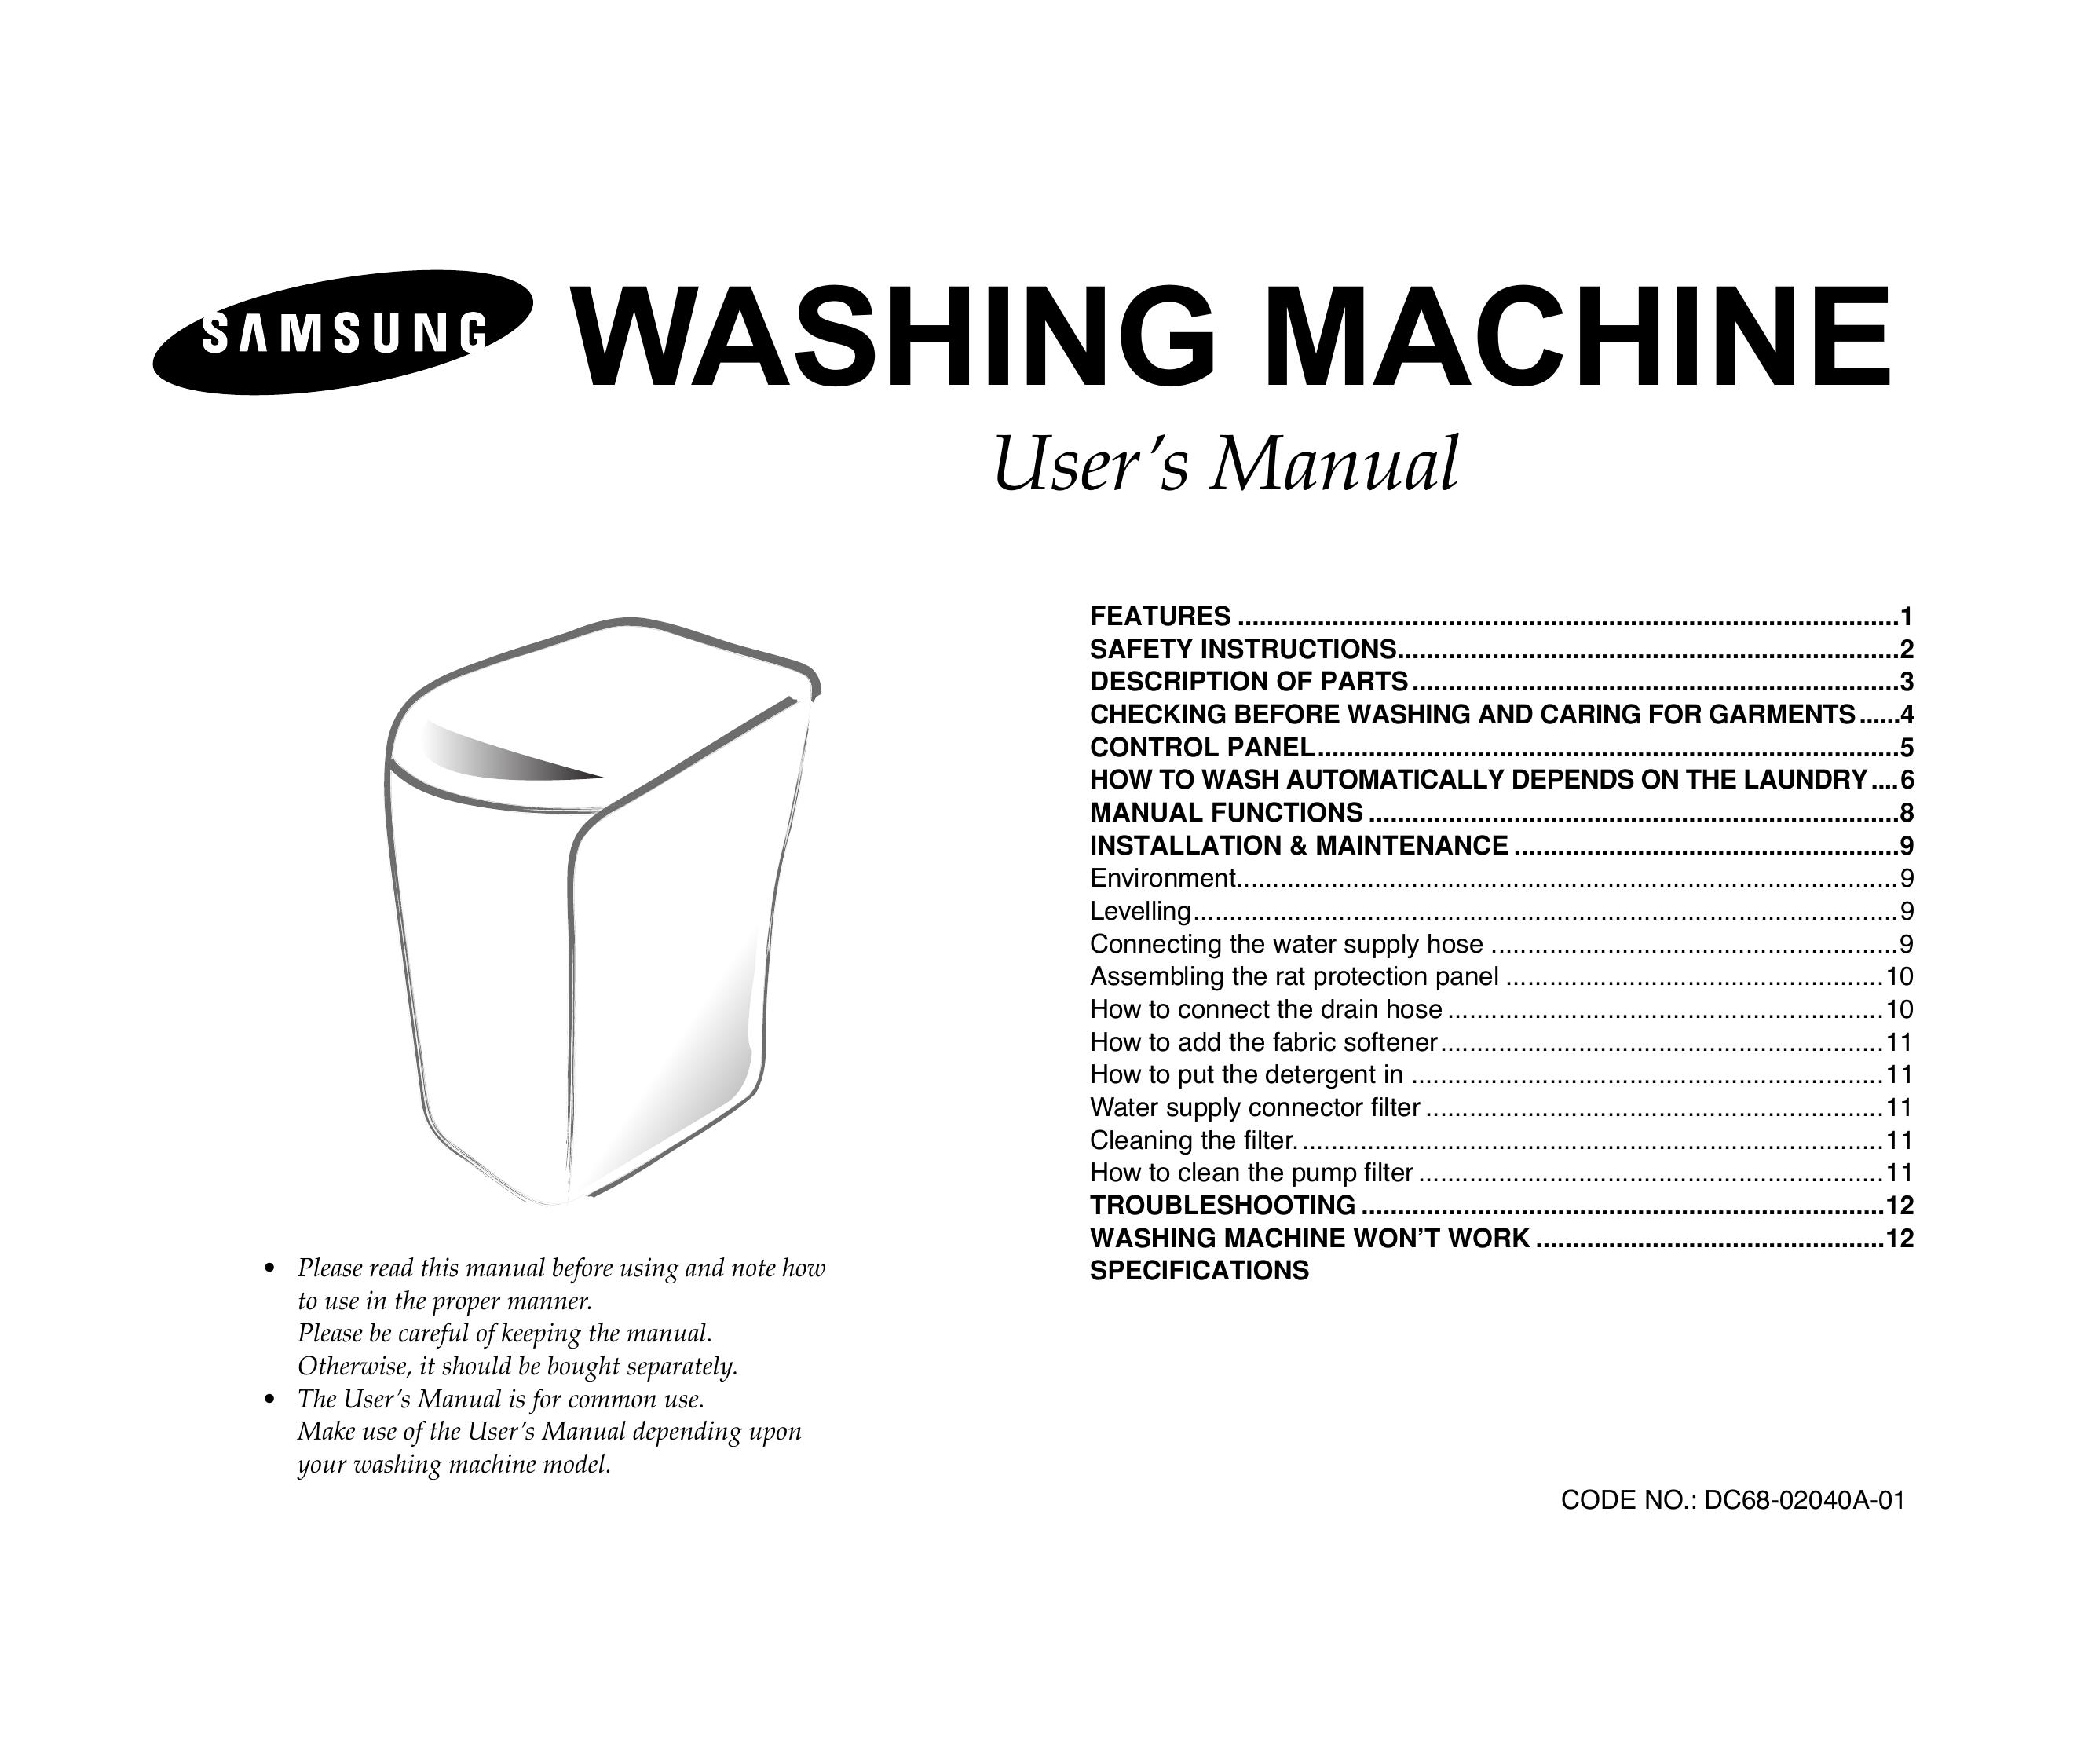 Samsung DC68-02040A-01 Washer/Dryer User Manual